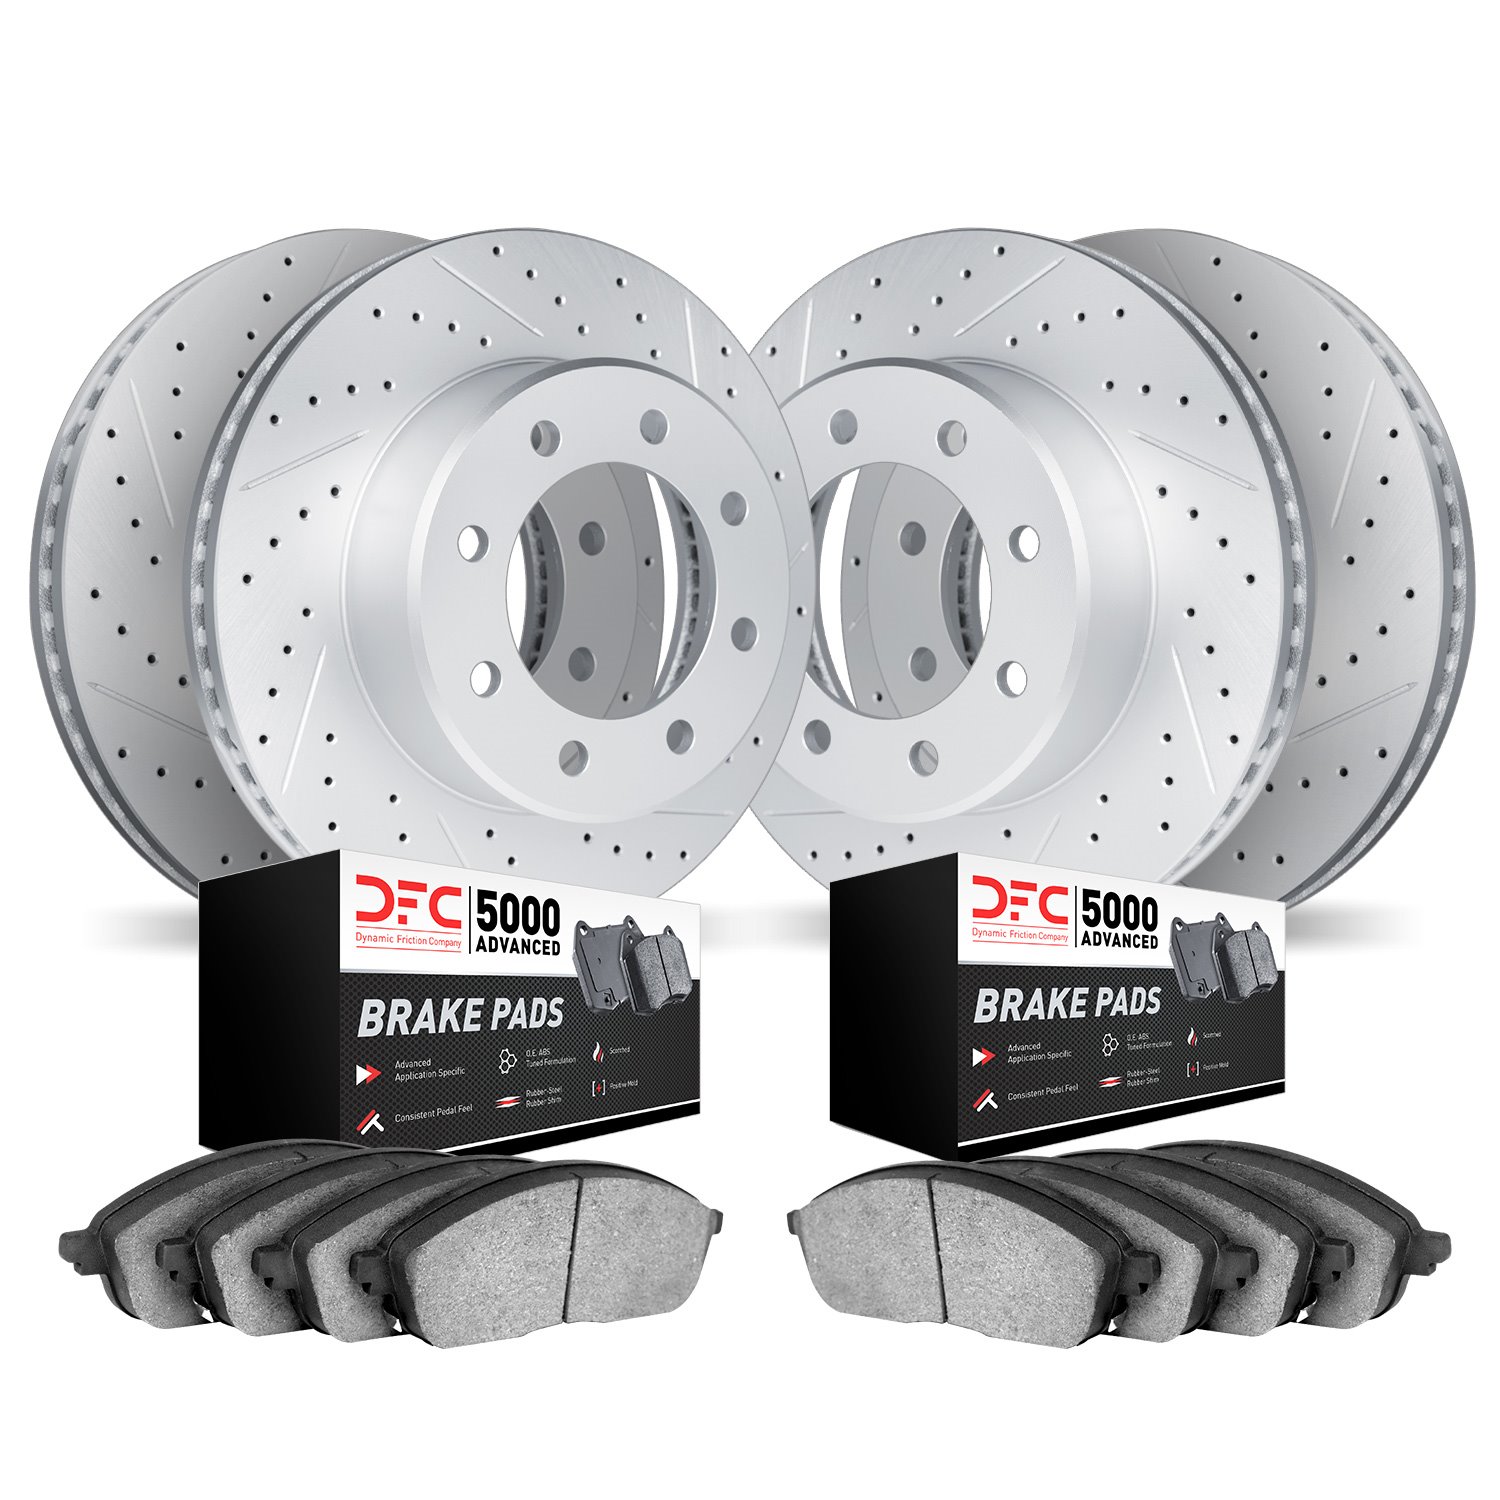 2504-48019 Geoperformance Drilled/Slotted Rotors w/5000 Advanced Brake Pads Kit, 2018-2020 GM, Position: Front and Rear